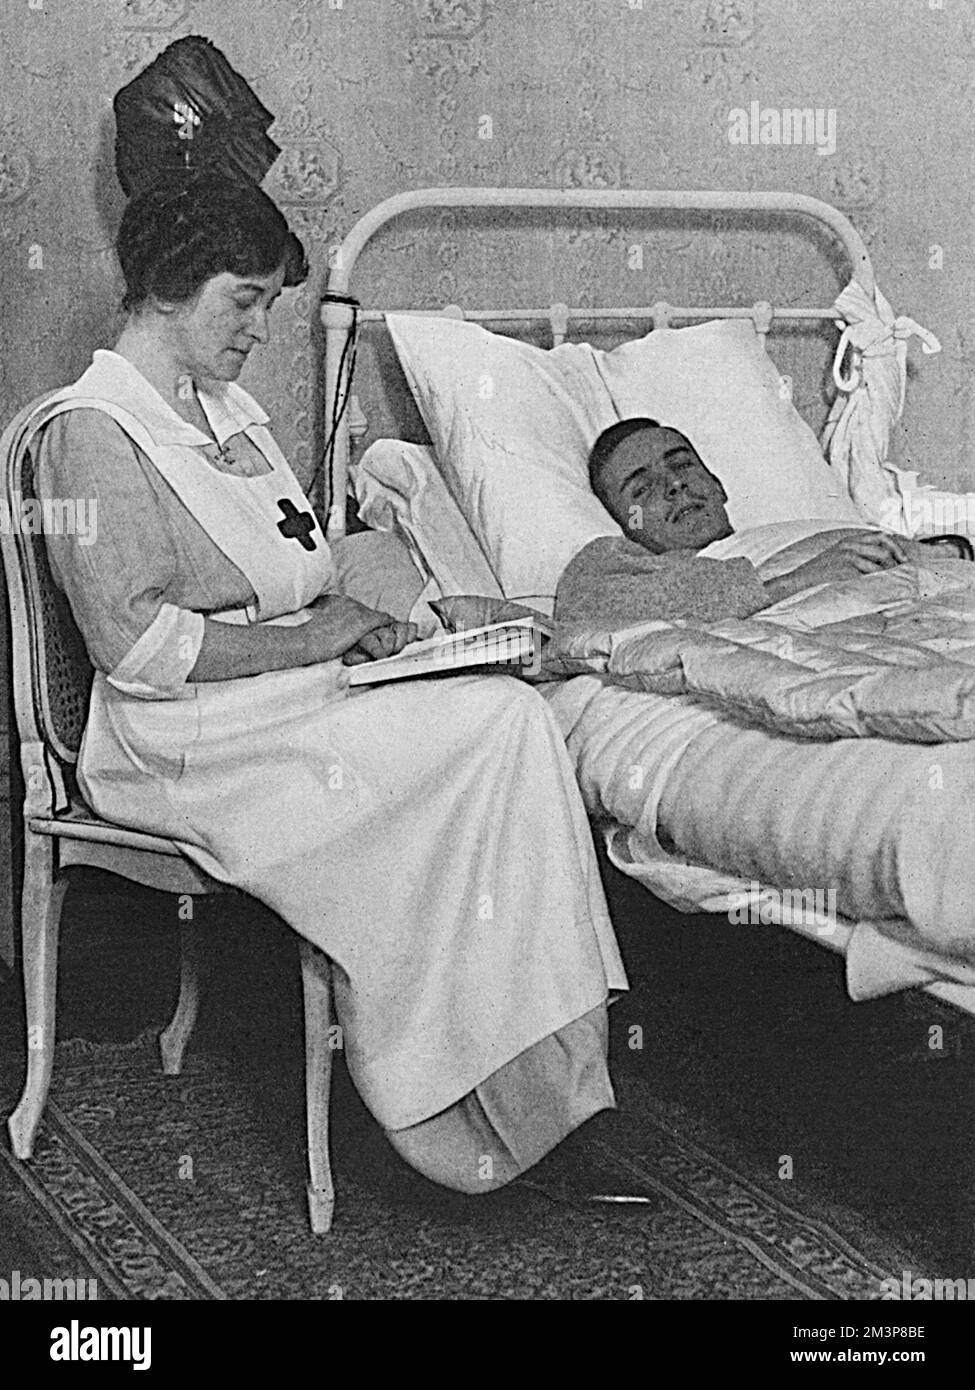 Almina Herbert, Countess of Carnarvon (15 August 1876  8 May 1969), English aristocrat, wife of George Herbert, 5th Earl of Carnarvon, and ch&#x2d25;laine of Highclere Castle, Newbury.  Pictured reading to a wounded officer at Highclere, where a large portion of the house had been turned into hospital for the wounded.  Lady Carnarvon was the daughter of Mr Frederick Charles Wombwell (though her natural father was the millionaire banker, Leopold de Rothschild)  and married the earl in 1895.       Date: 1914 Stock Photo